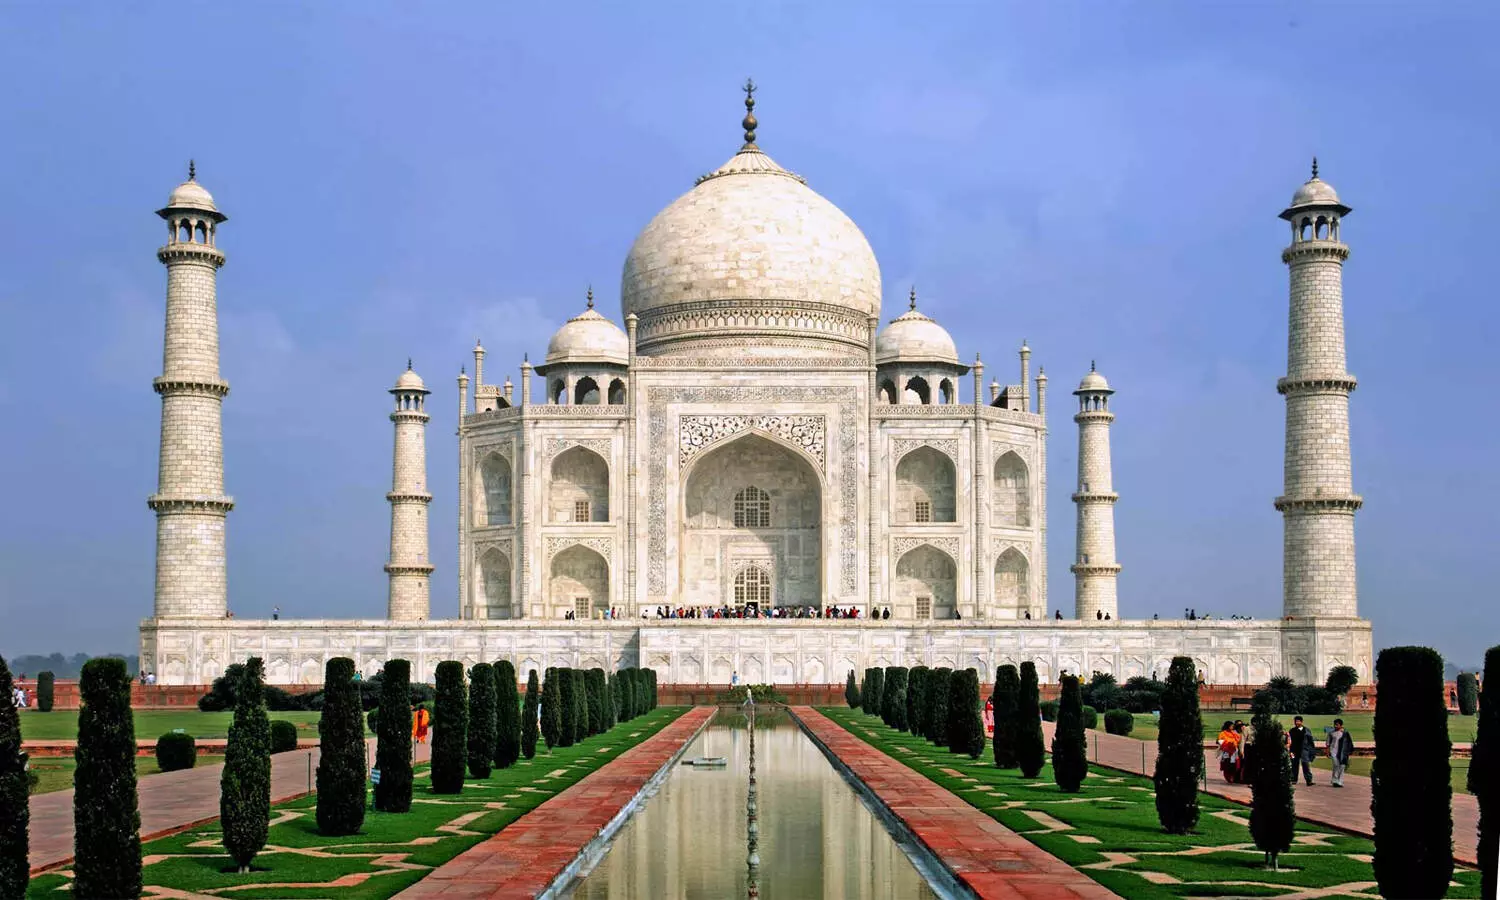 MP man builds exact replica of Taj Mahal as a gift to his wife